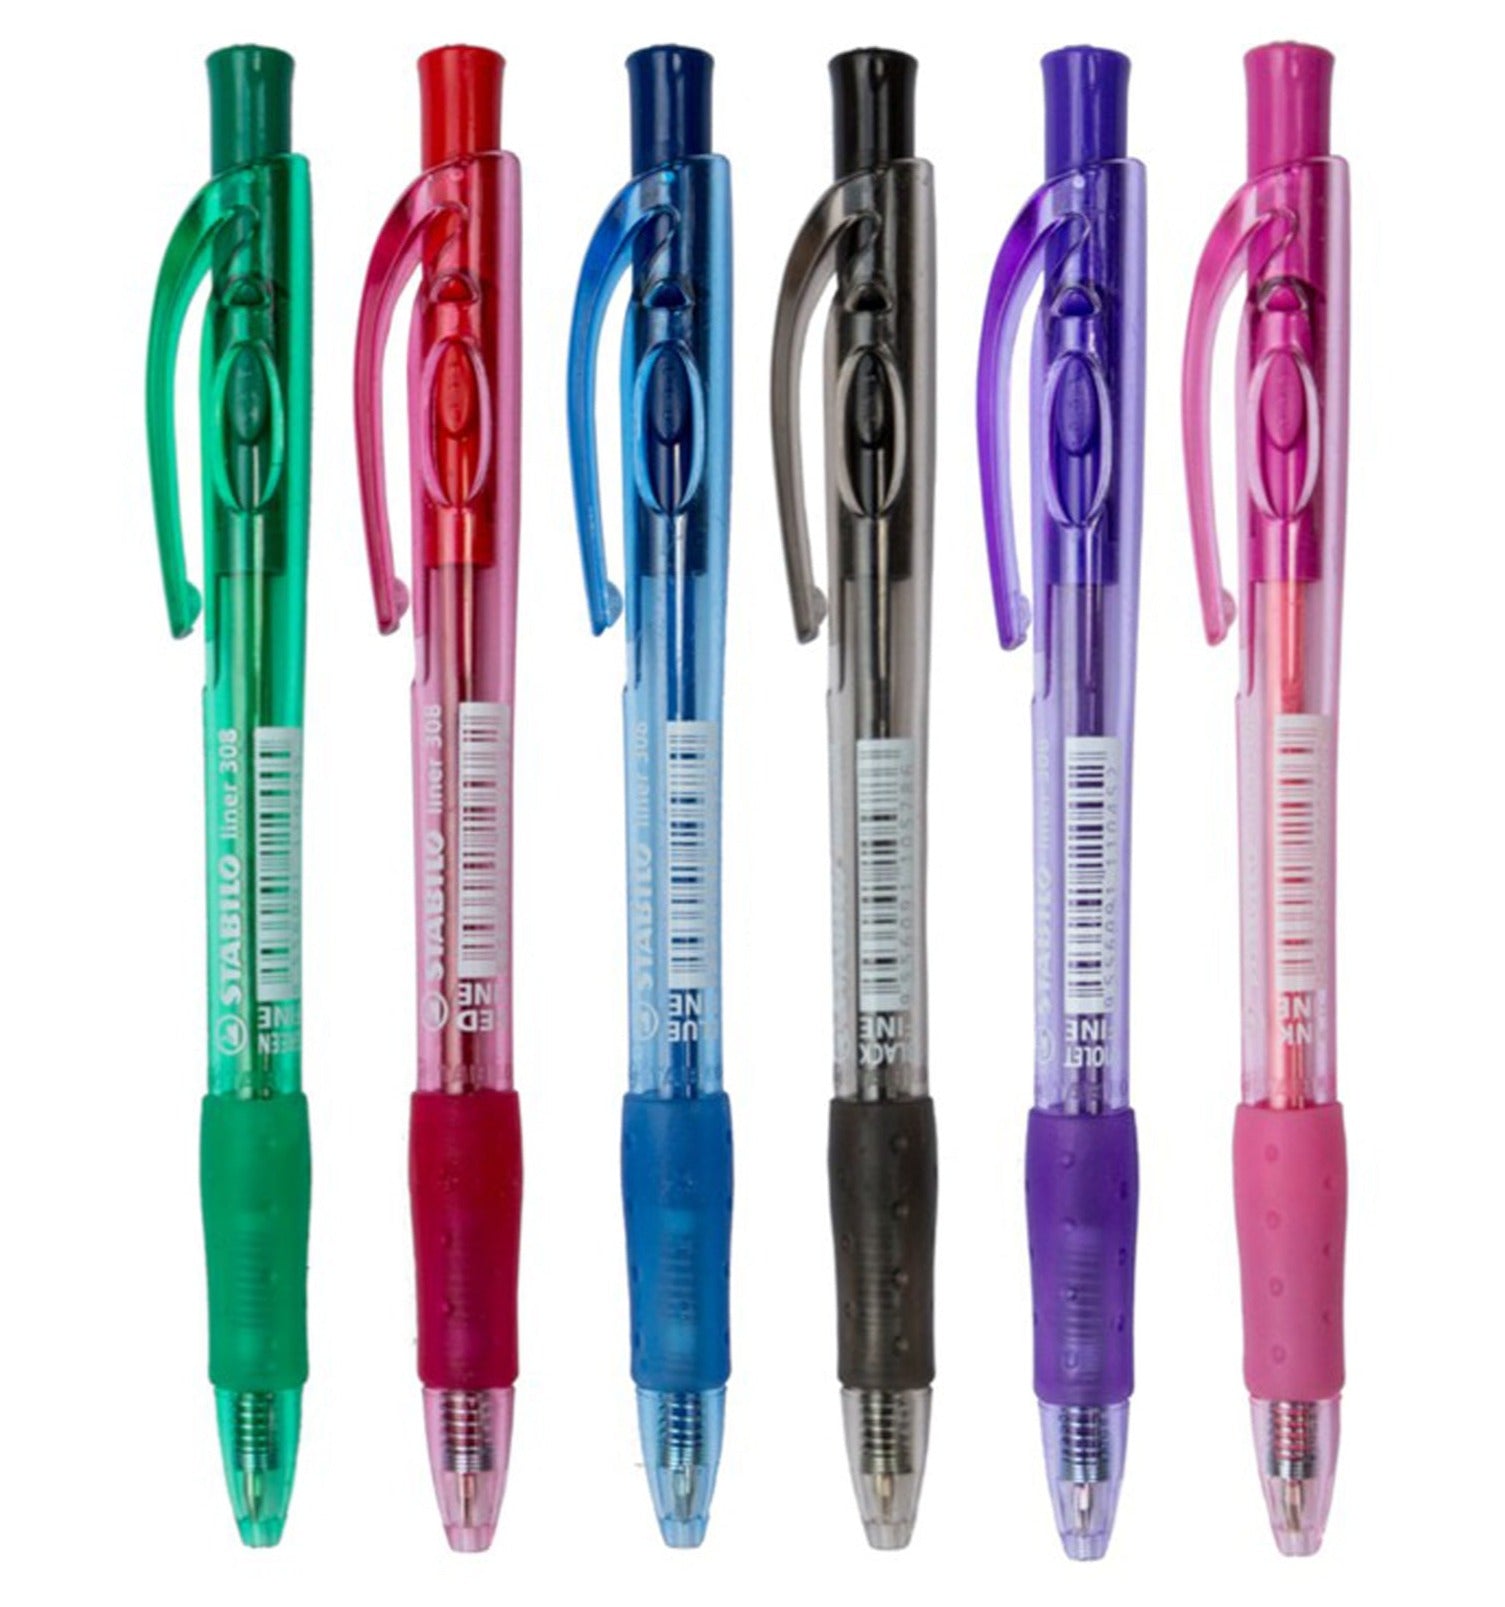 STABILO 308 Retractable Ballpoint Pen with Rubber Grip - Pack of 6 - Schwan-STABILO -Most colourful Stationery Shop